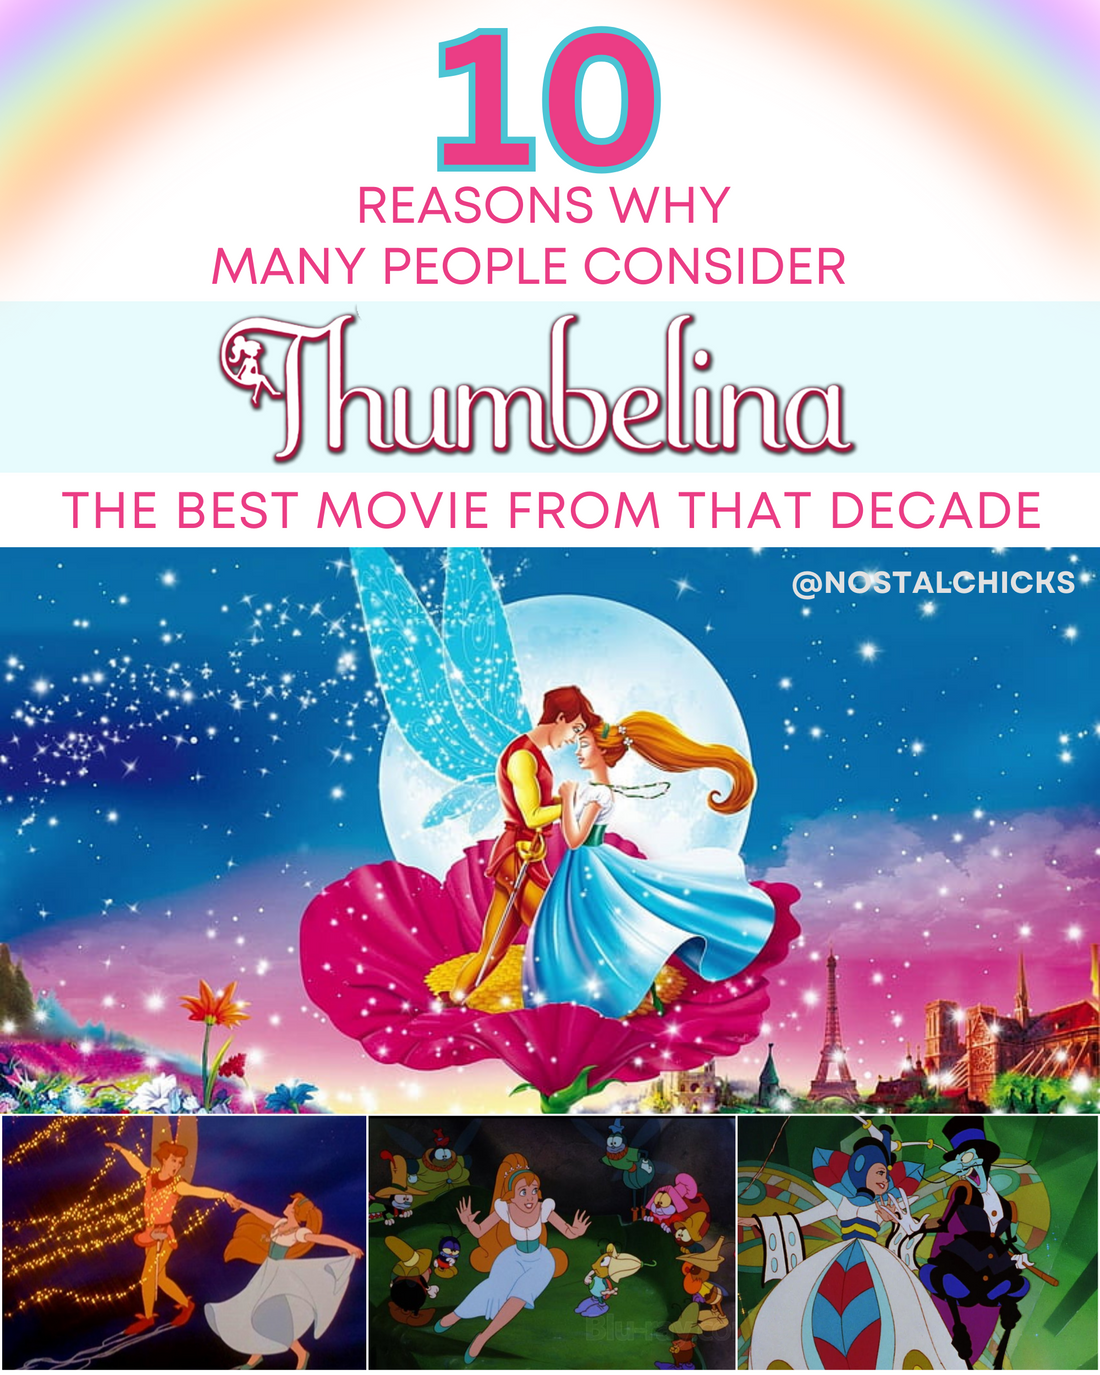 10 REASONS WHY MANY PEOPLE CONSIDER "THUMBELINA" TO BE ONE OF THE BEST MOVIES FROM THAT DECADE